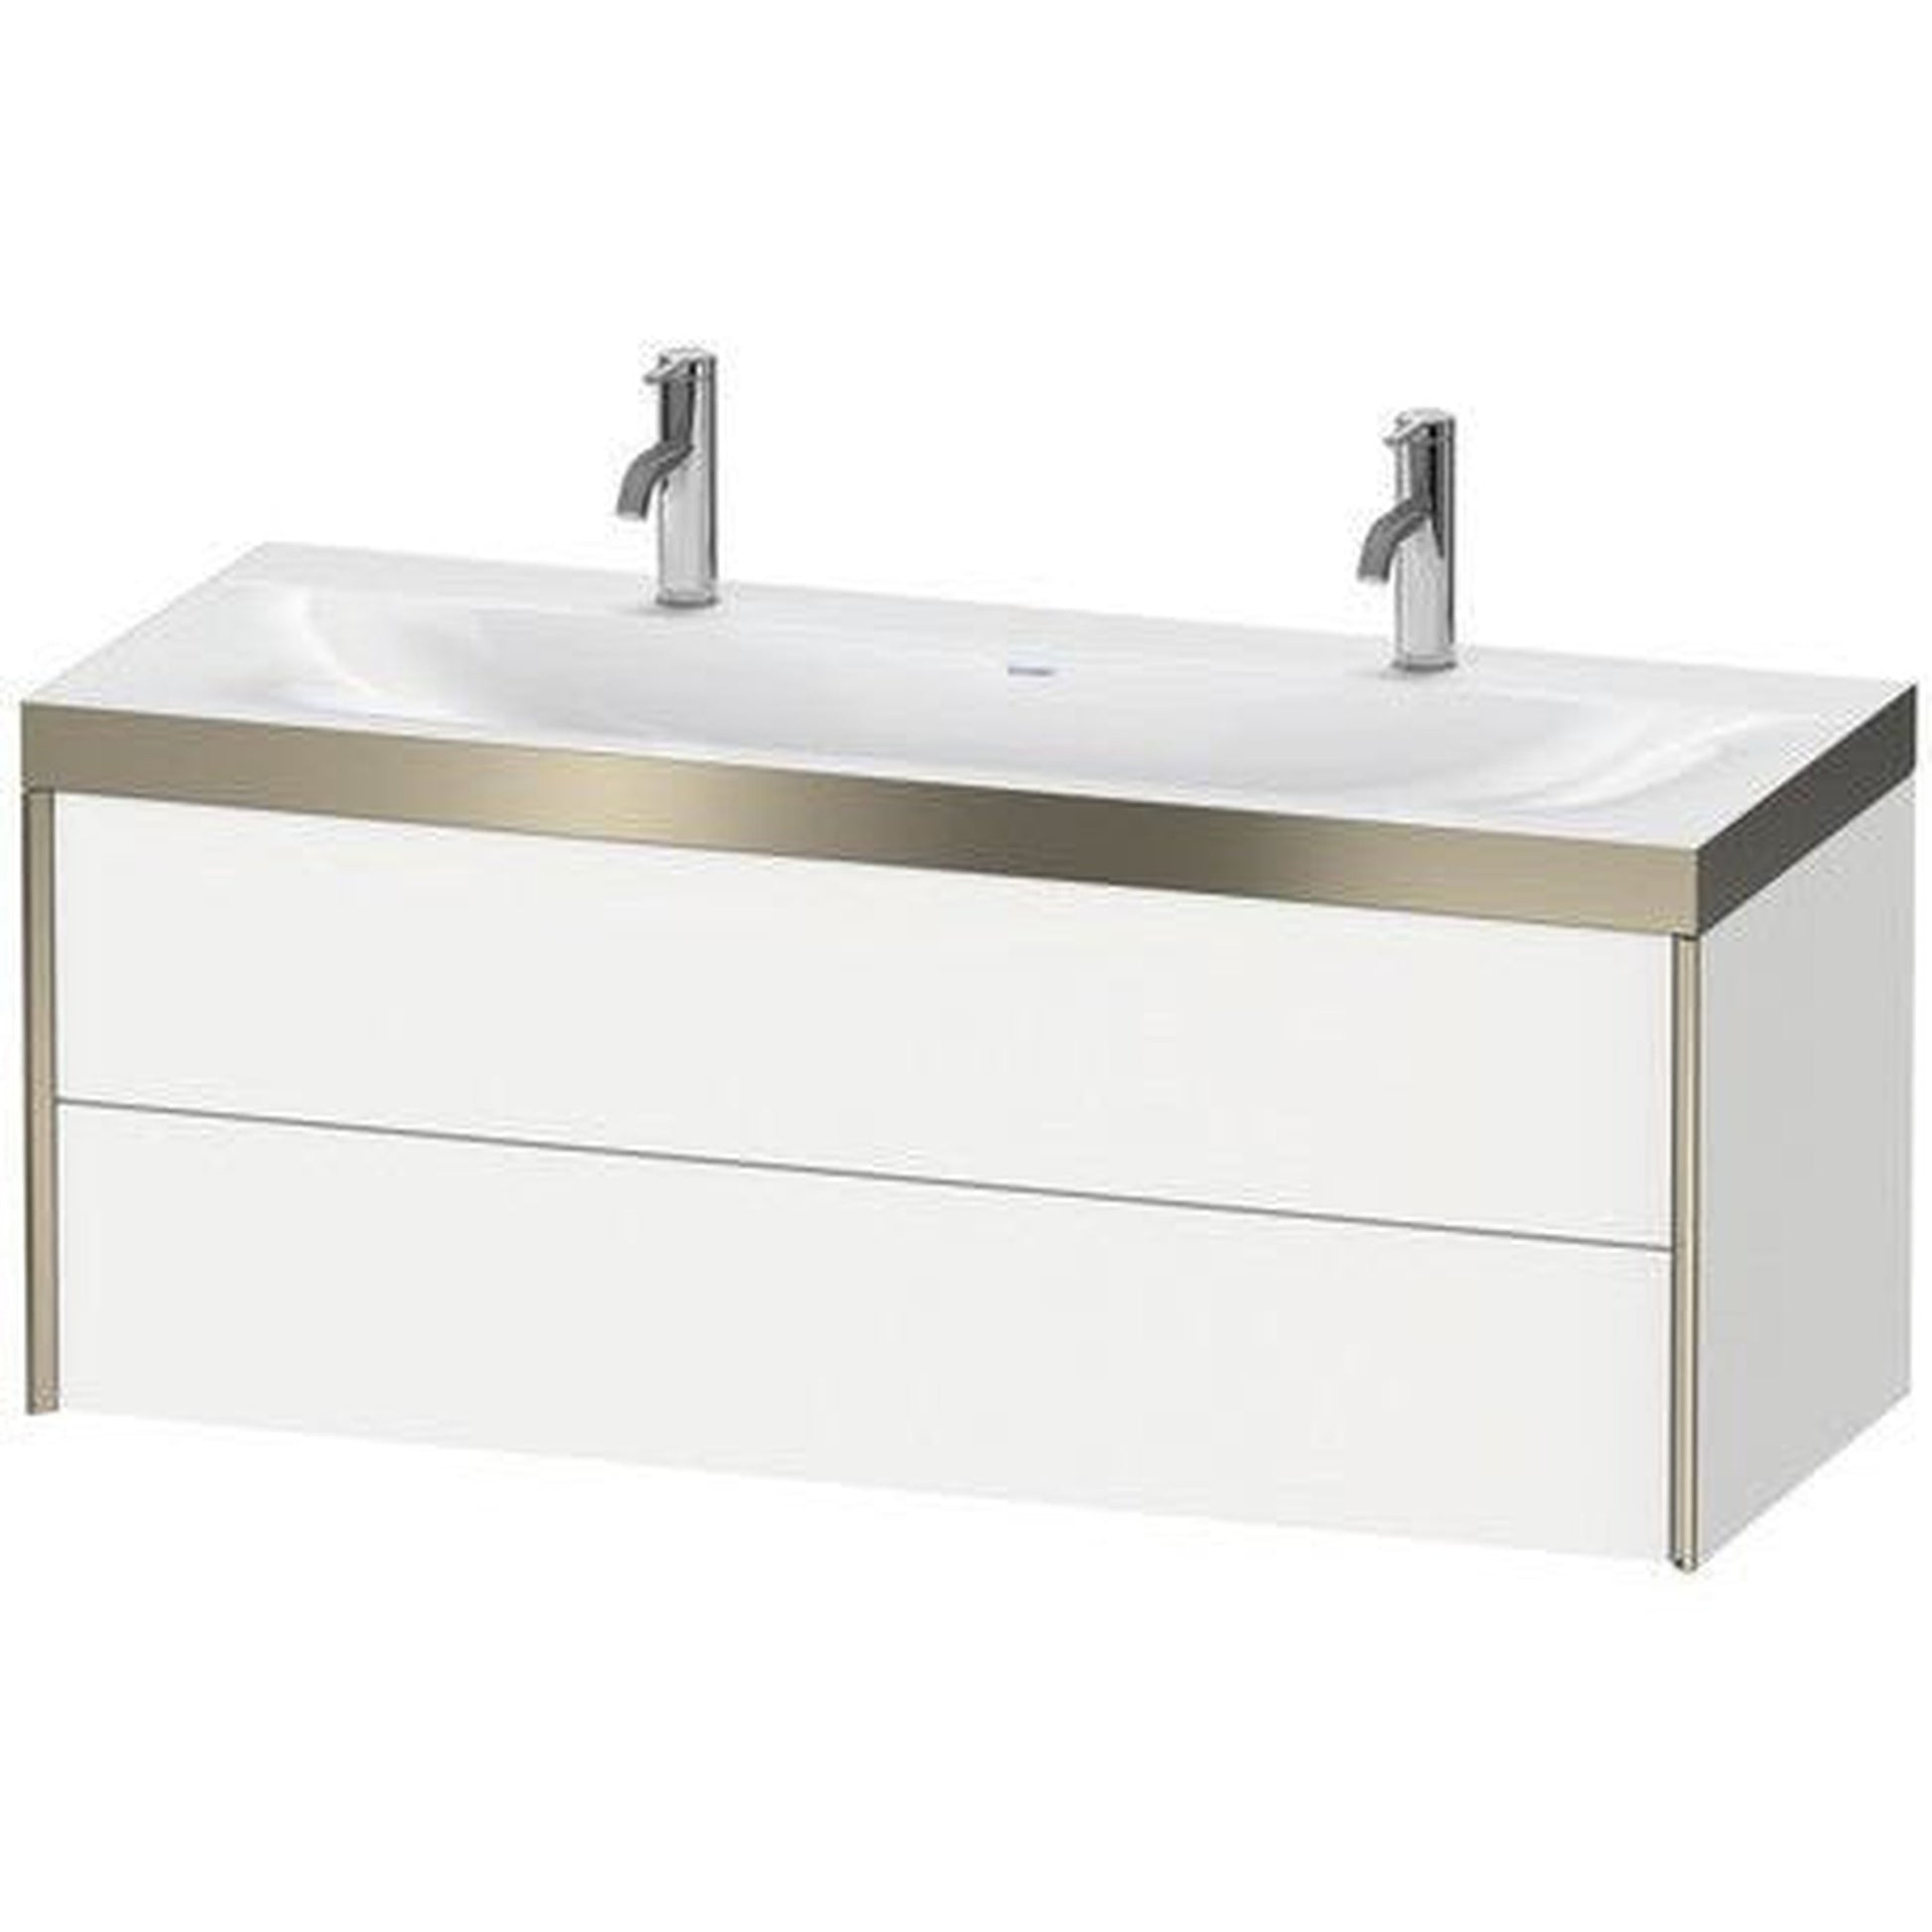 Duravit Xviu 47" x 20" x 19" Two Drawer C-Bonded Wall-Mount Vanity Kit With One Tap Hole, Walnut Brushed (XV4618OB269C)